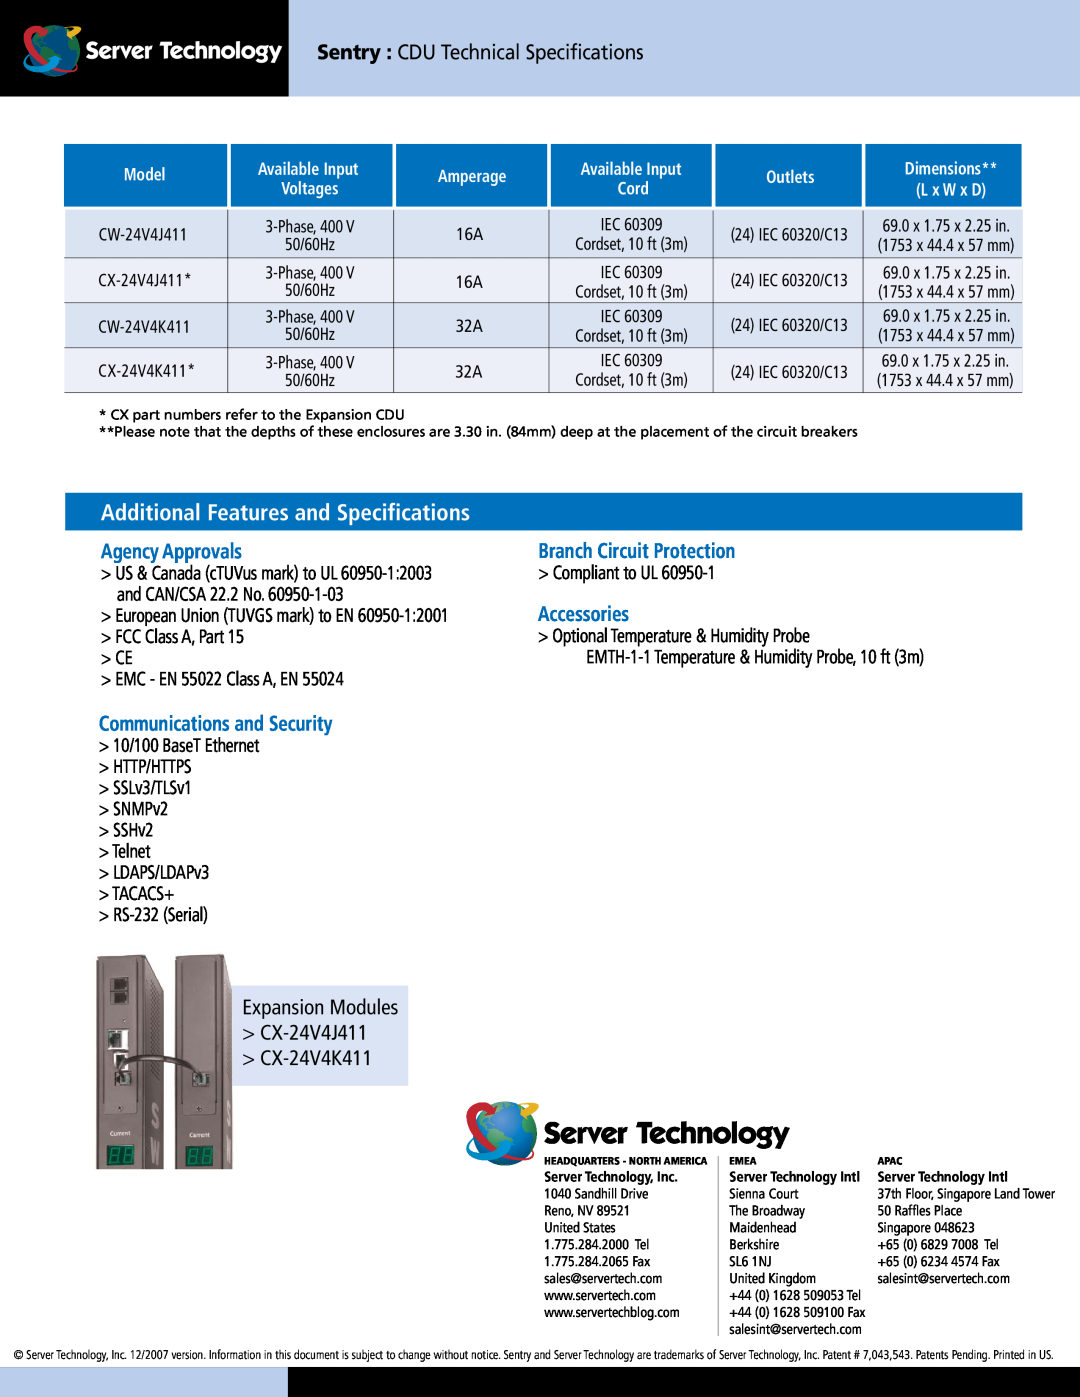 Server Technology CDUCW-24V4 Additional Features and Specifications, Agency Approvals, Branch Circuit Protection, Model 